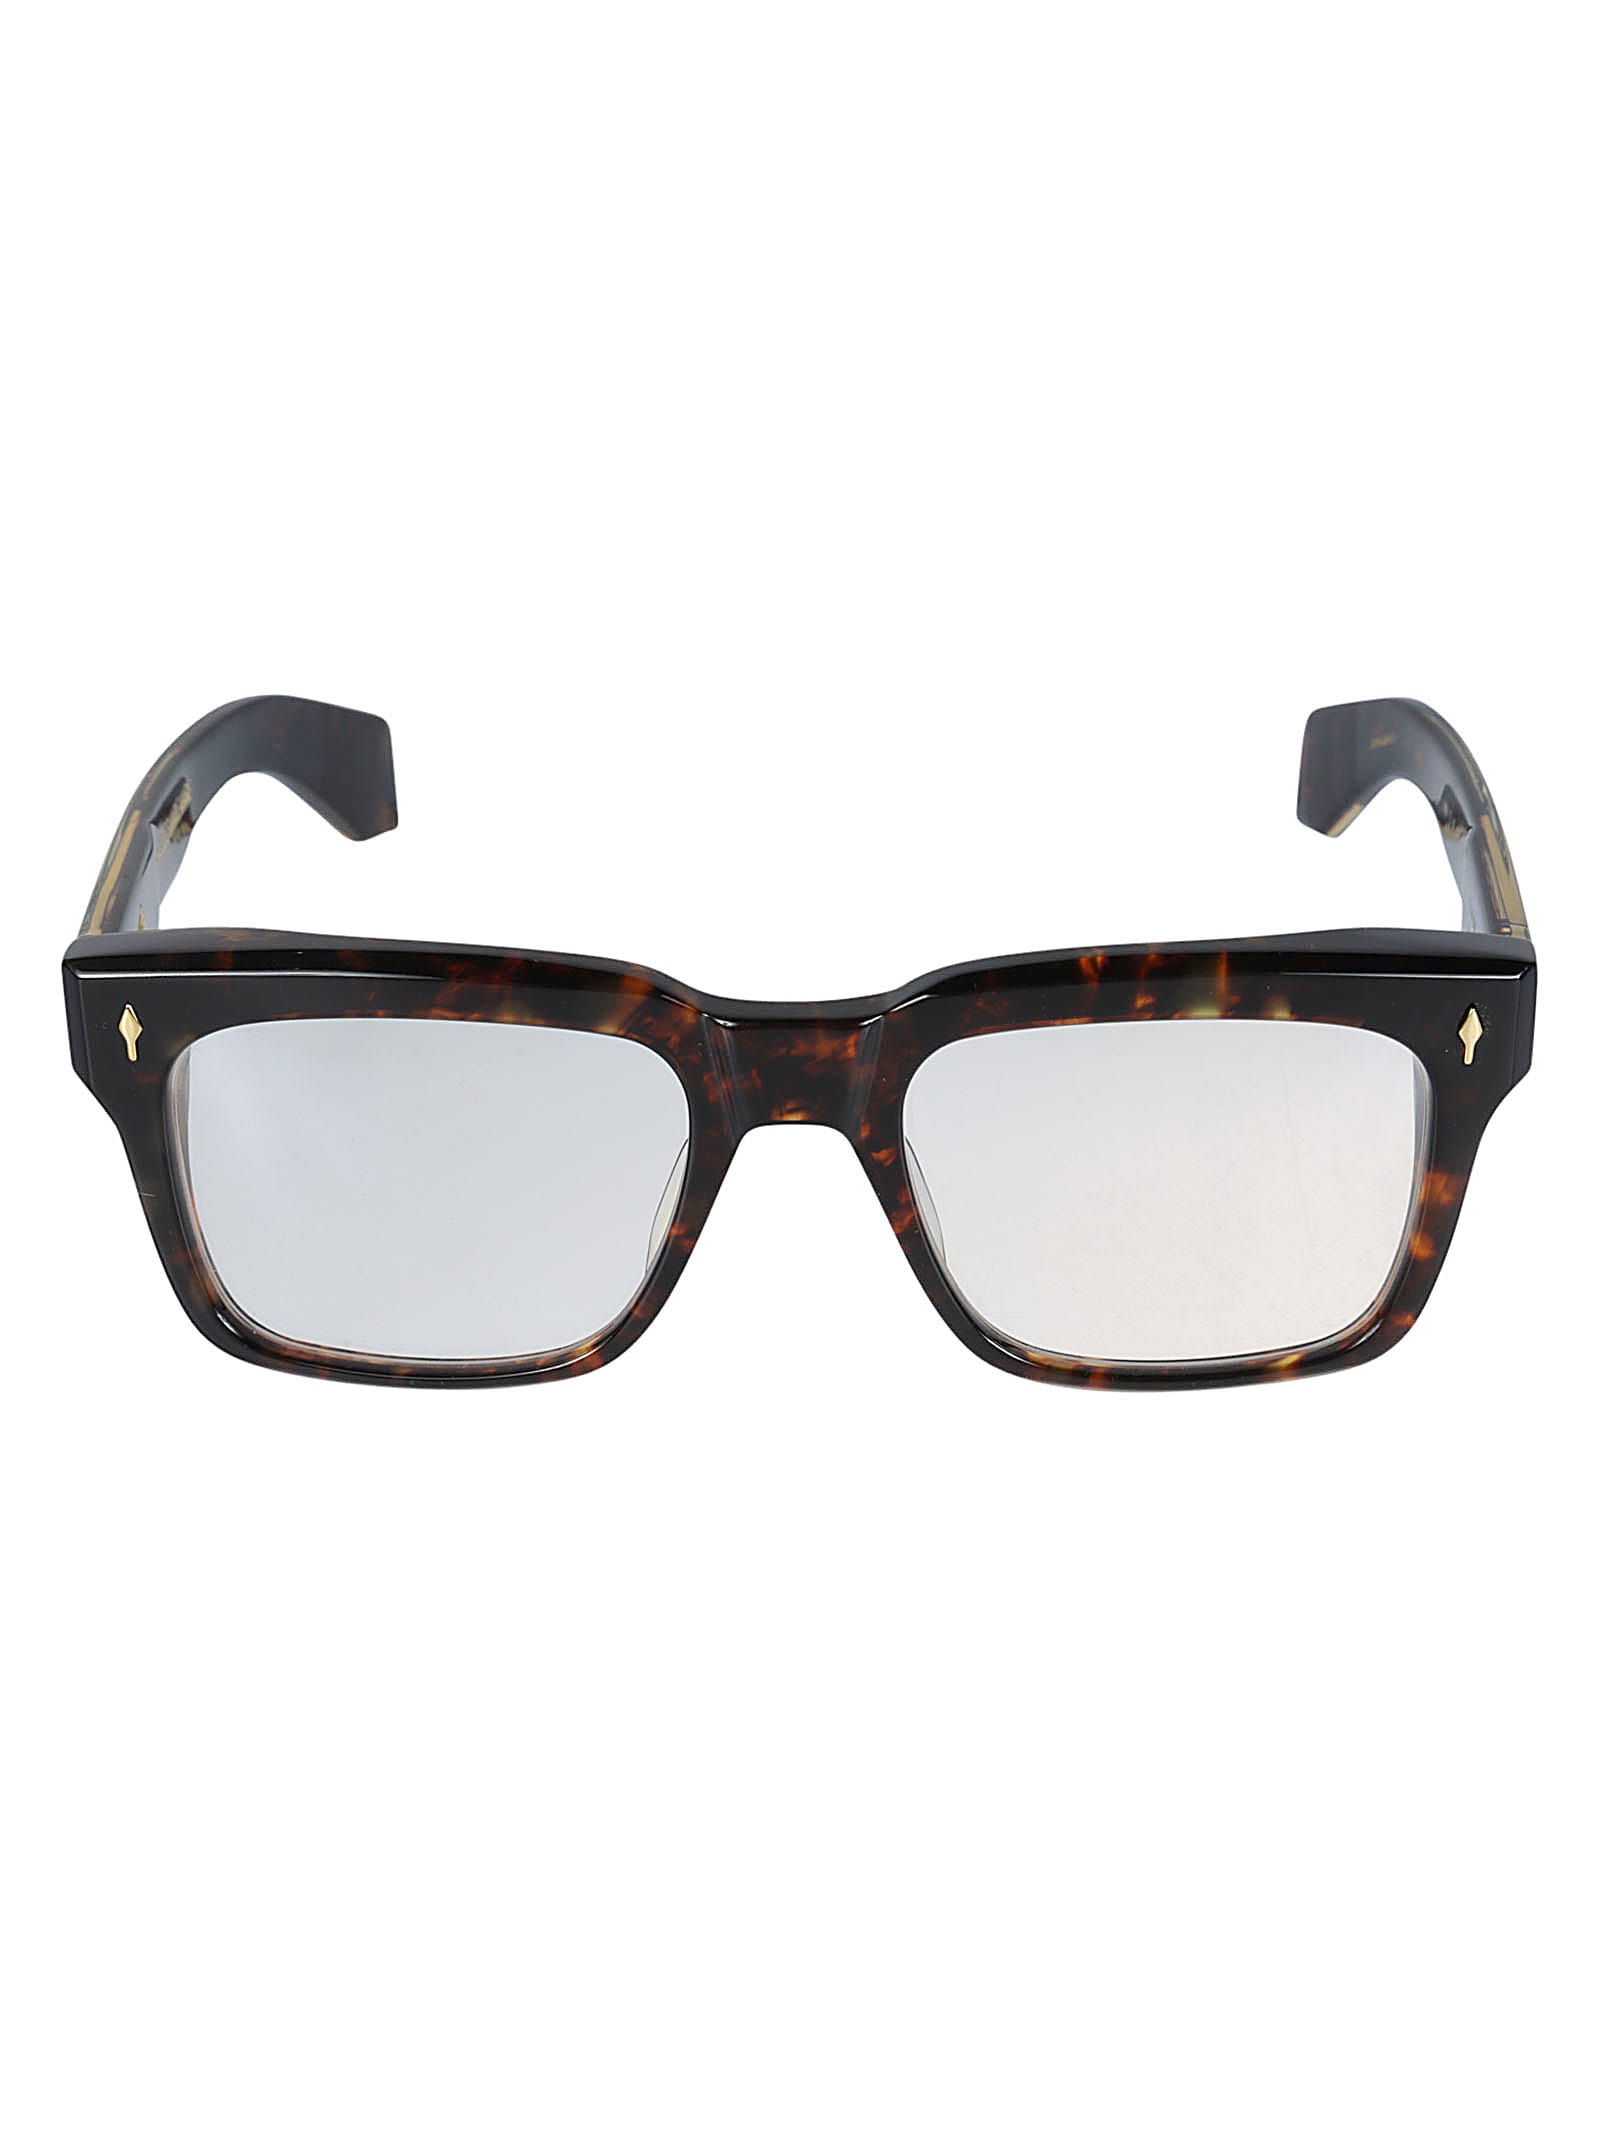 Jacques Marie Mage Flame Effect Glasses